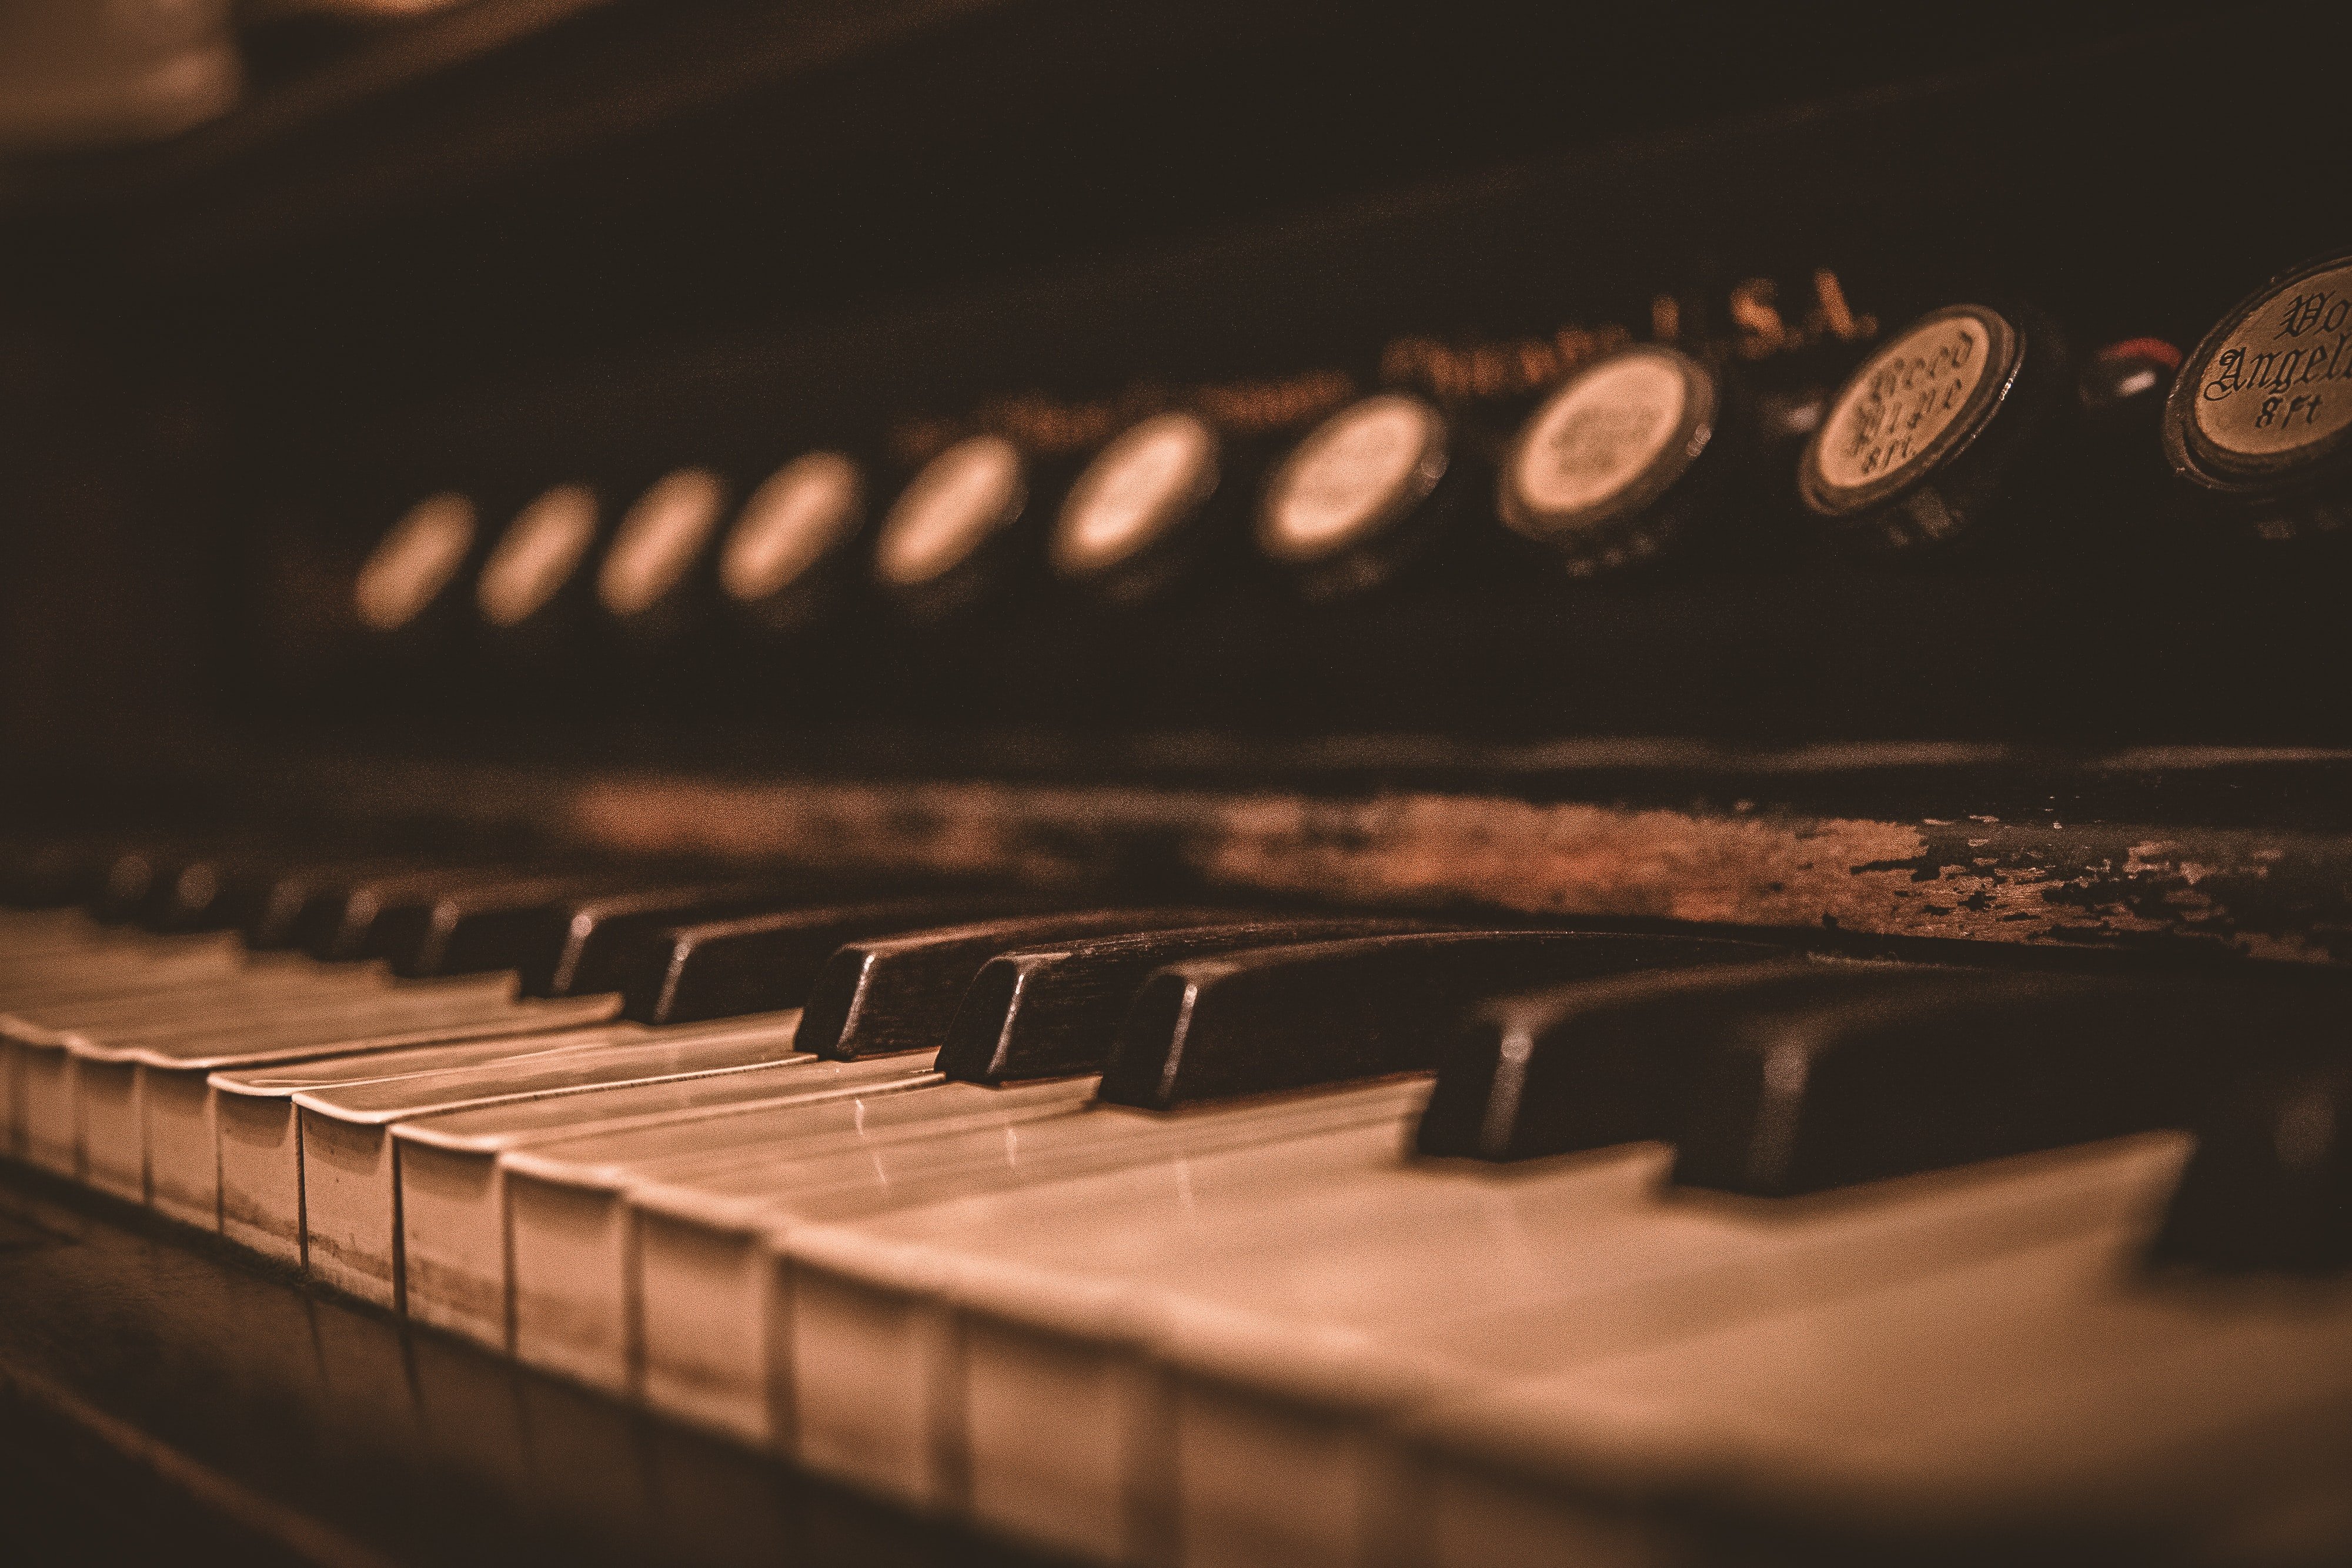 The hidden fortune in the old piano changed Adele's life forever. | Source: Unsplash